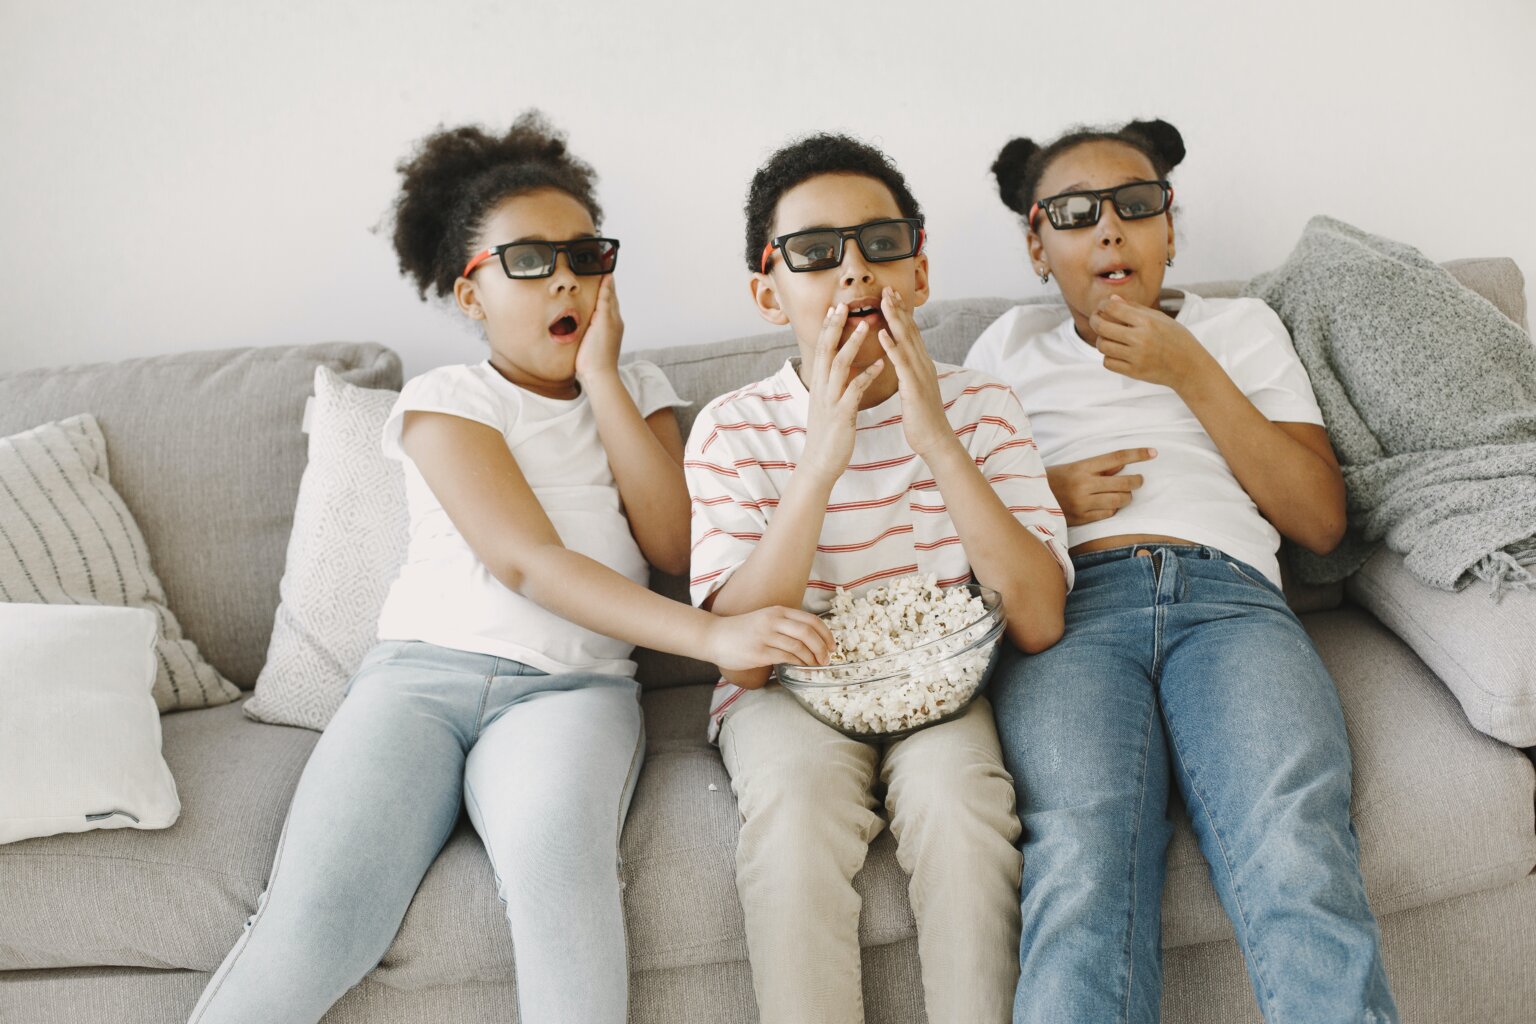 Three kids, two girls and one boy, looking surprised while eating popcorn and watching a movie.